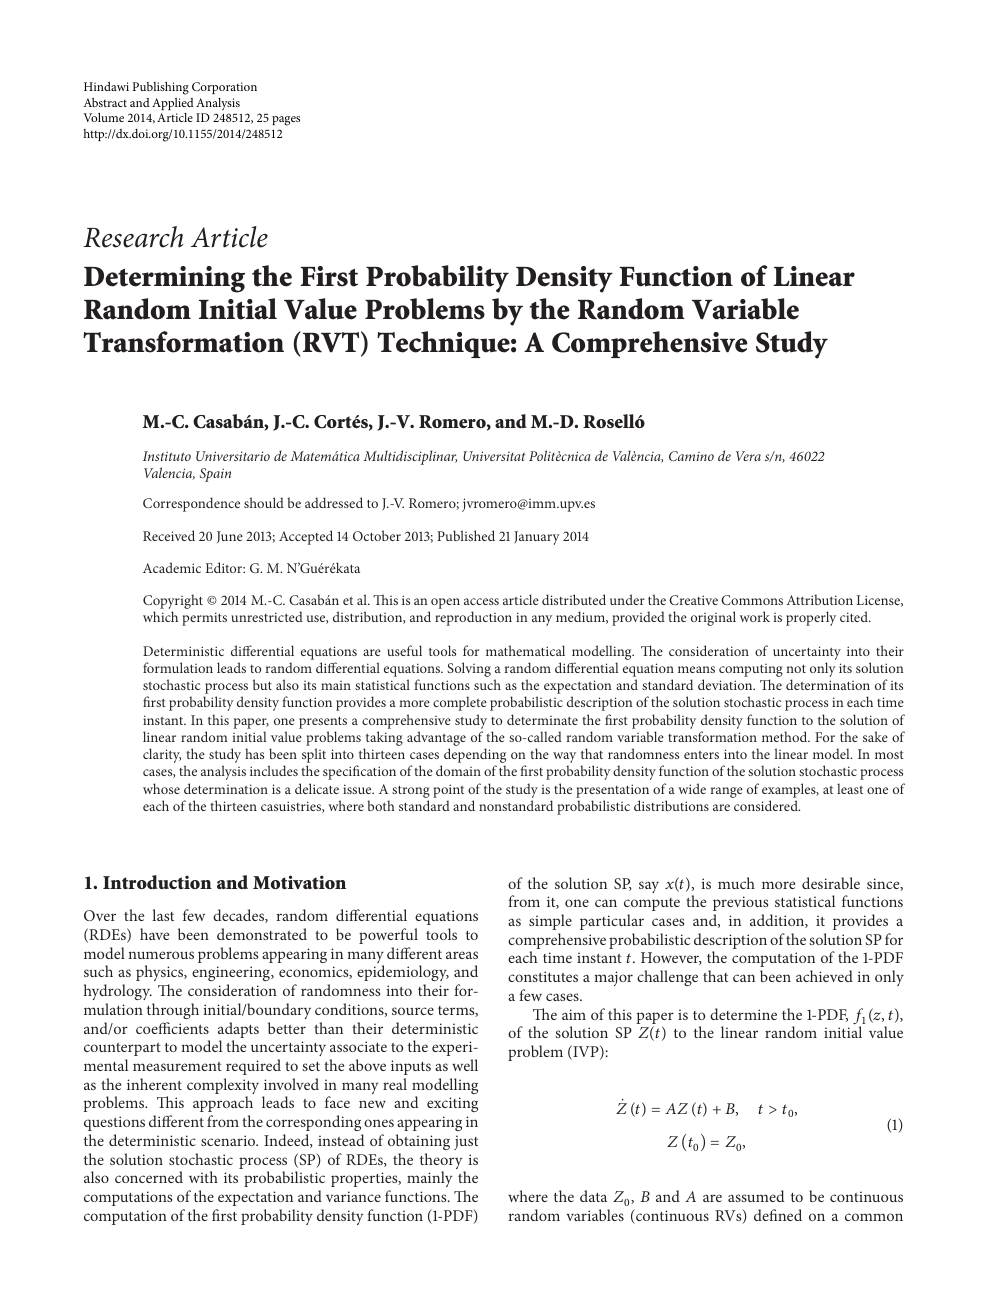 Determining The First Probability Density Function Of Linear Random Initial Value Problems By The Random Variable Transformation Rvt Technique A Comprehensive Study Topic Of Research Paper In Mathematics Download Scholarly Article